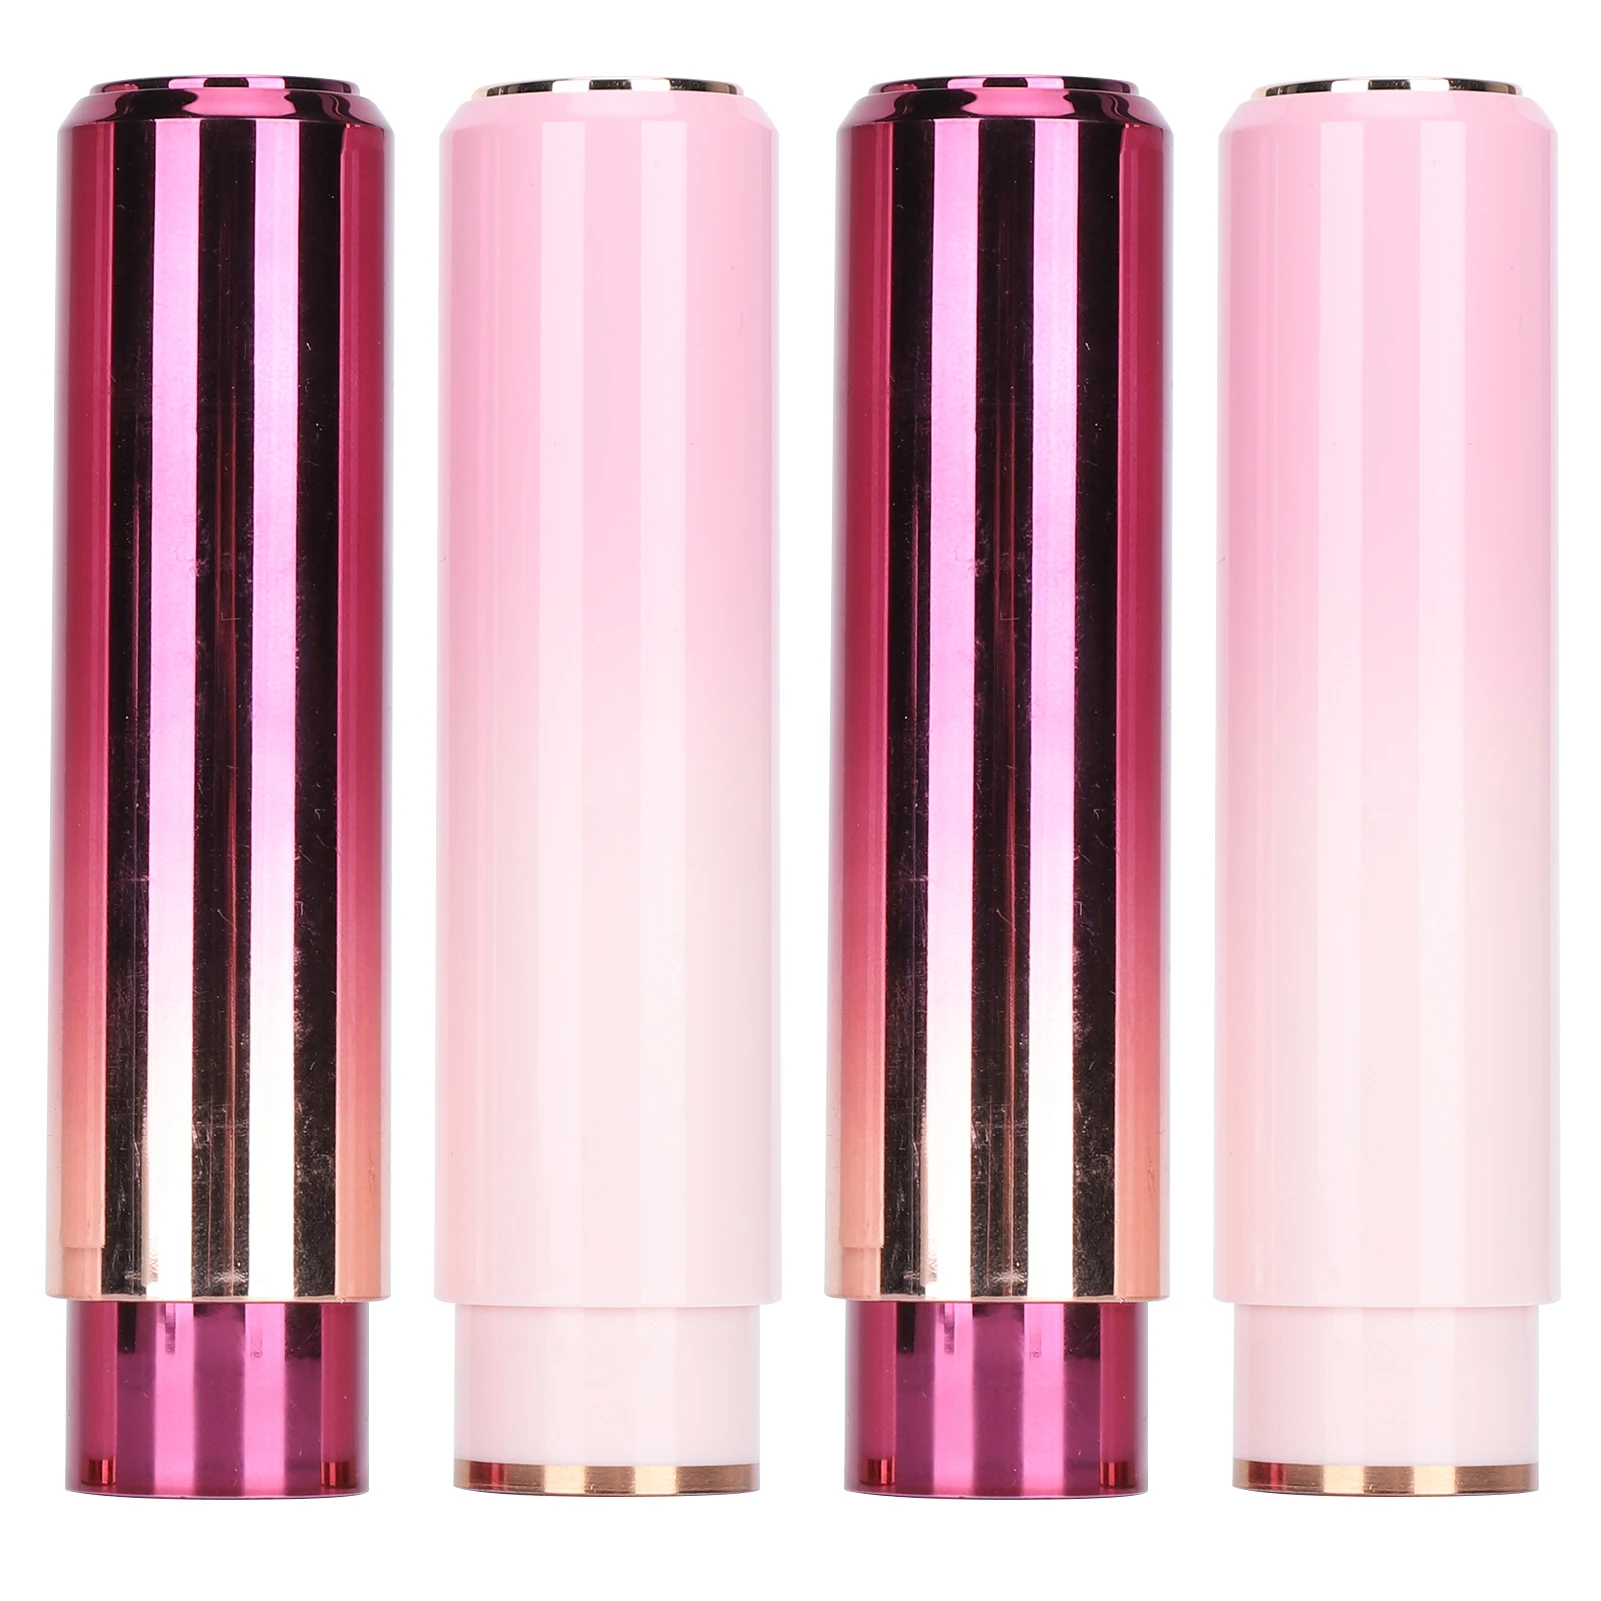 4Pcs Empty Lipstick Tube DIY Empty Lip Gloss Lipstick Lip Balm Containers Tube Press Style Refillable Lipstick Tube new style 3 wire pro covert acoustic tube earpiece headset ptt mic microphone for motorola cls1110 cls1410 cls1413 cls1450 radio